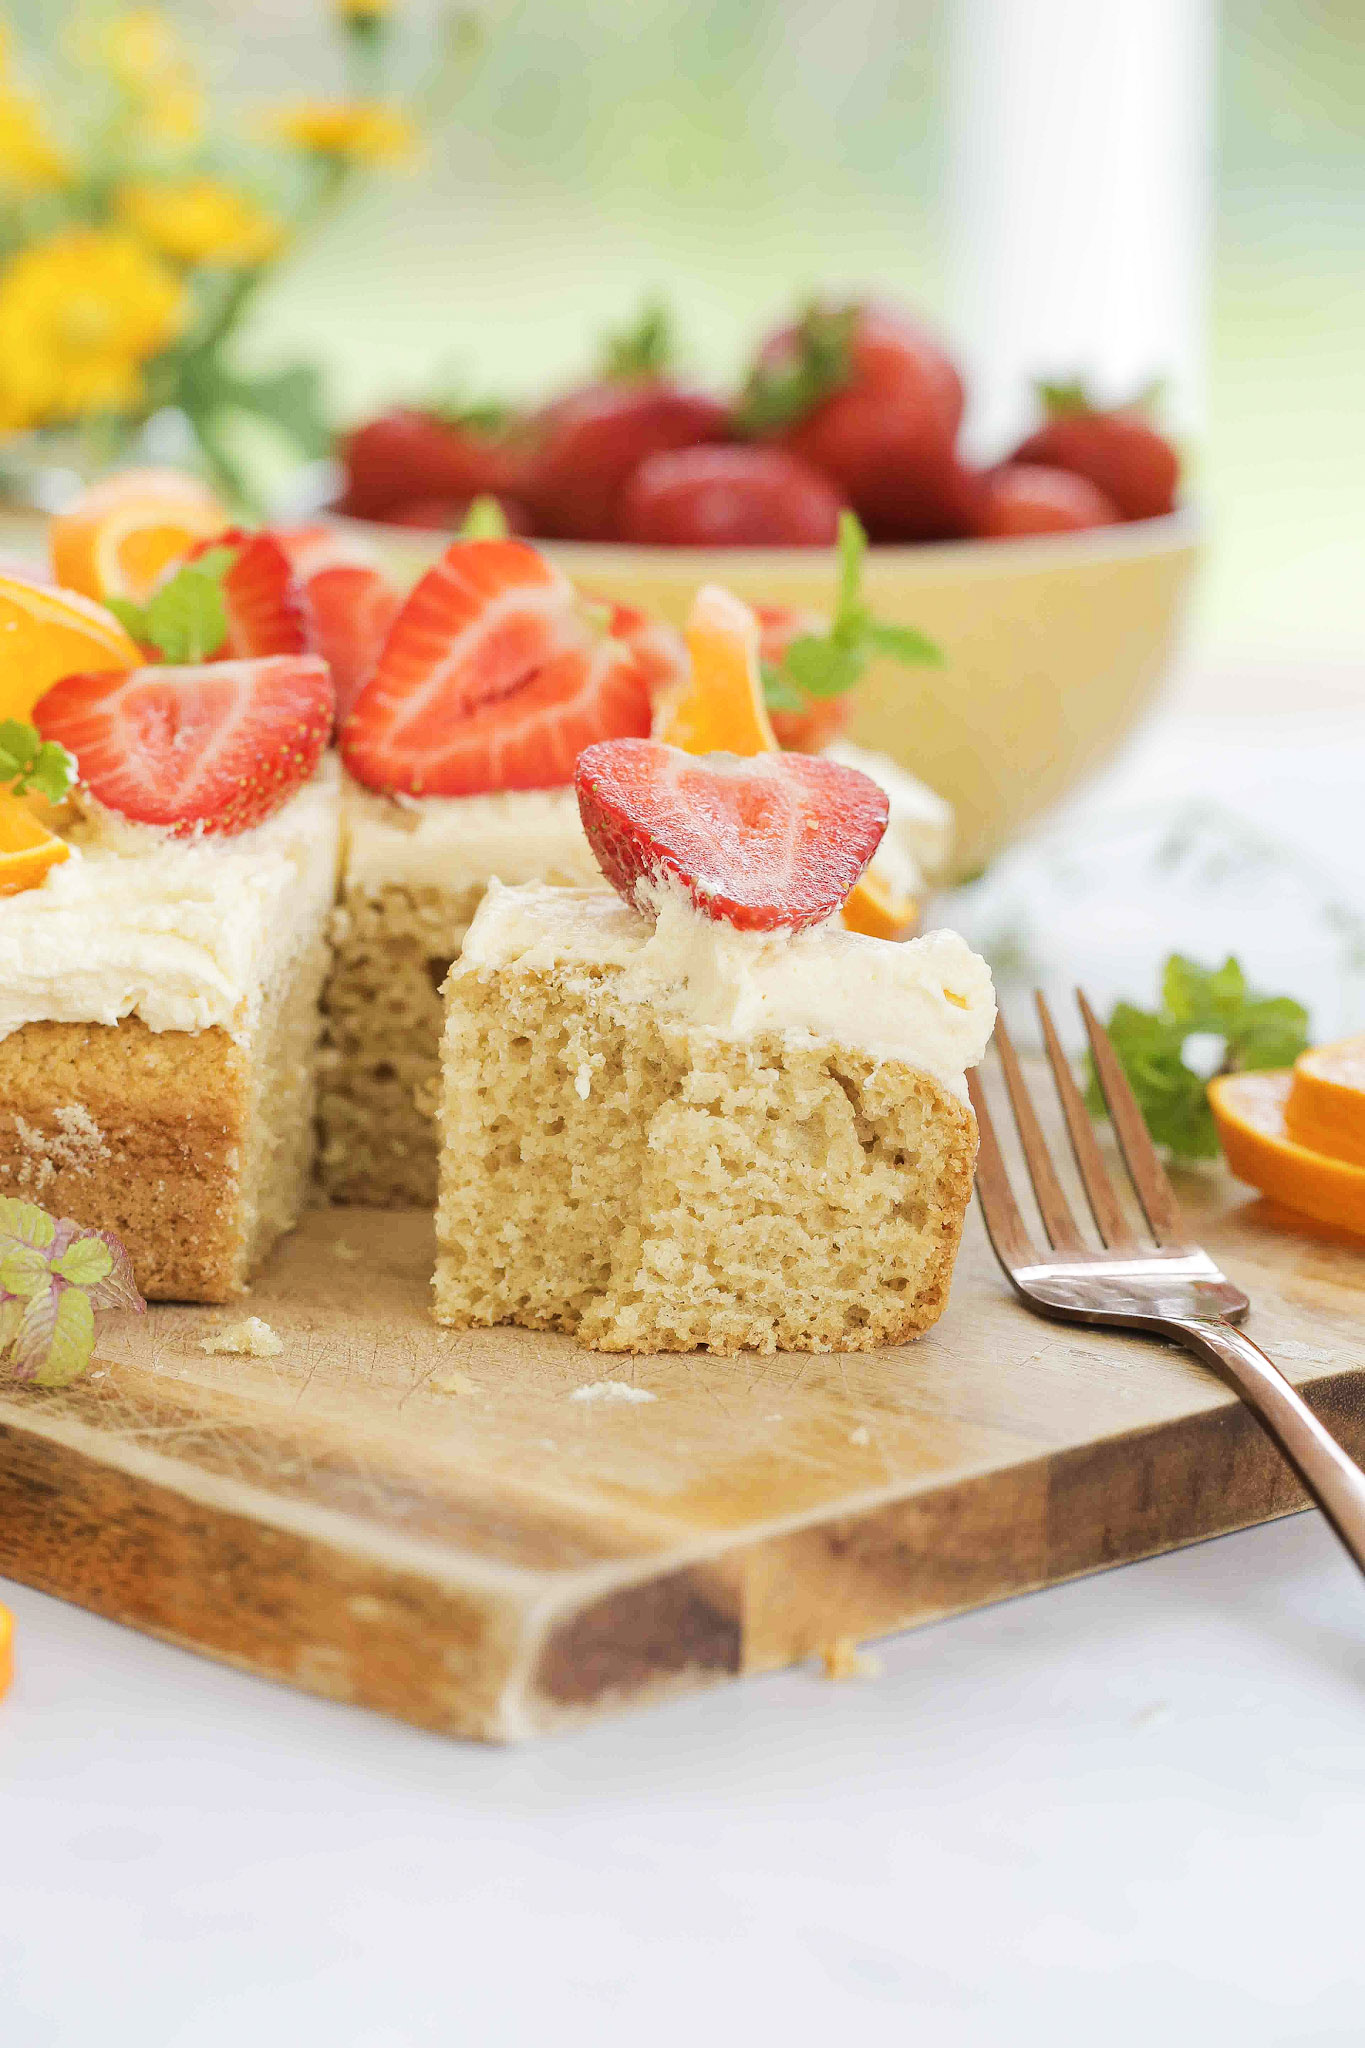 Soft and fluffy vegan vanilla sheet cake or tray bake is an easy buttery sponge, topped with whipped icing and fresh fruit. Perfect for birthdays, afternoon tea or simply because! Recipe on thecookandhim.com #vanillacake #vegancake #veganvanillacake #birthdaycake #sheetcake #traybakecake #veganfrosting